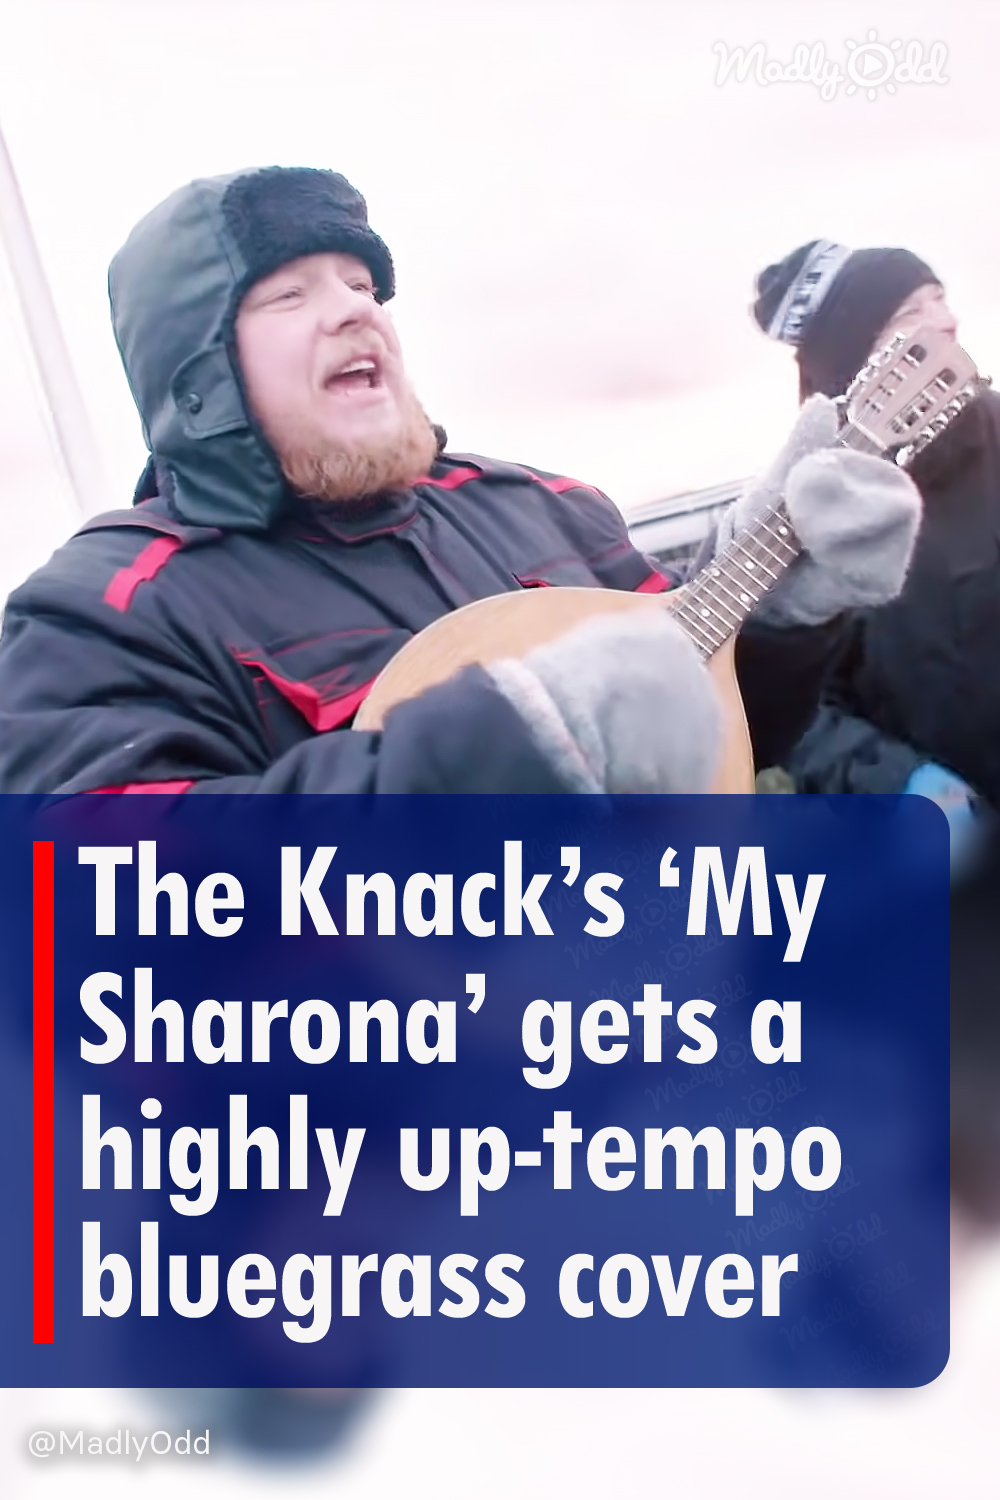 The Knack’s ‘My Sharona’ gets a highly up-tempo bluegrass cover